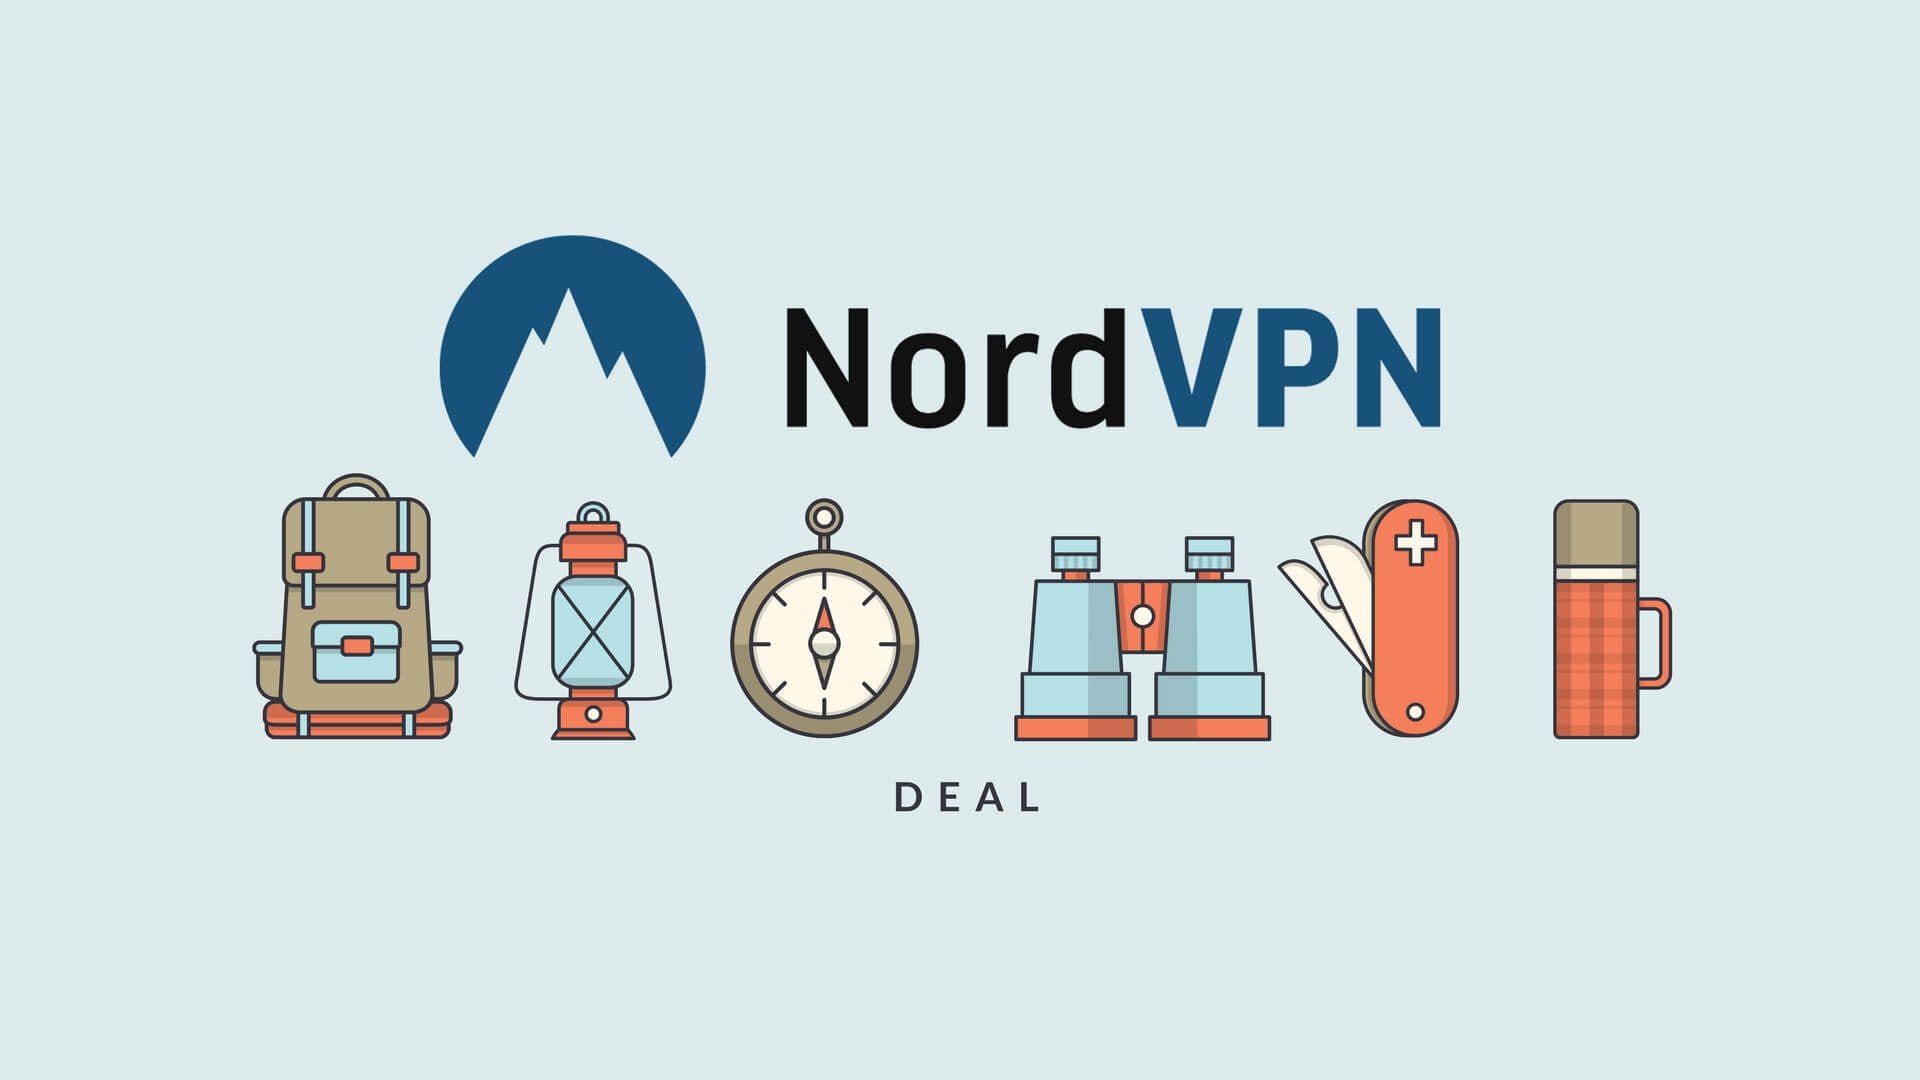 NordVPN Mod APK v5.9.3 Is Out - Find Out How To Download The Premium Unlocked Version